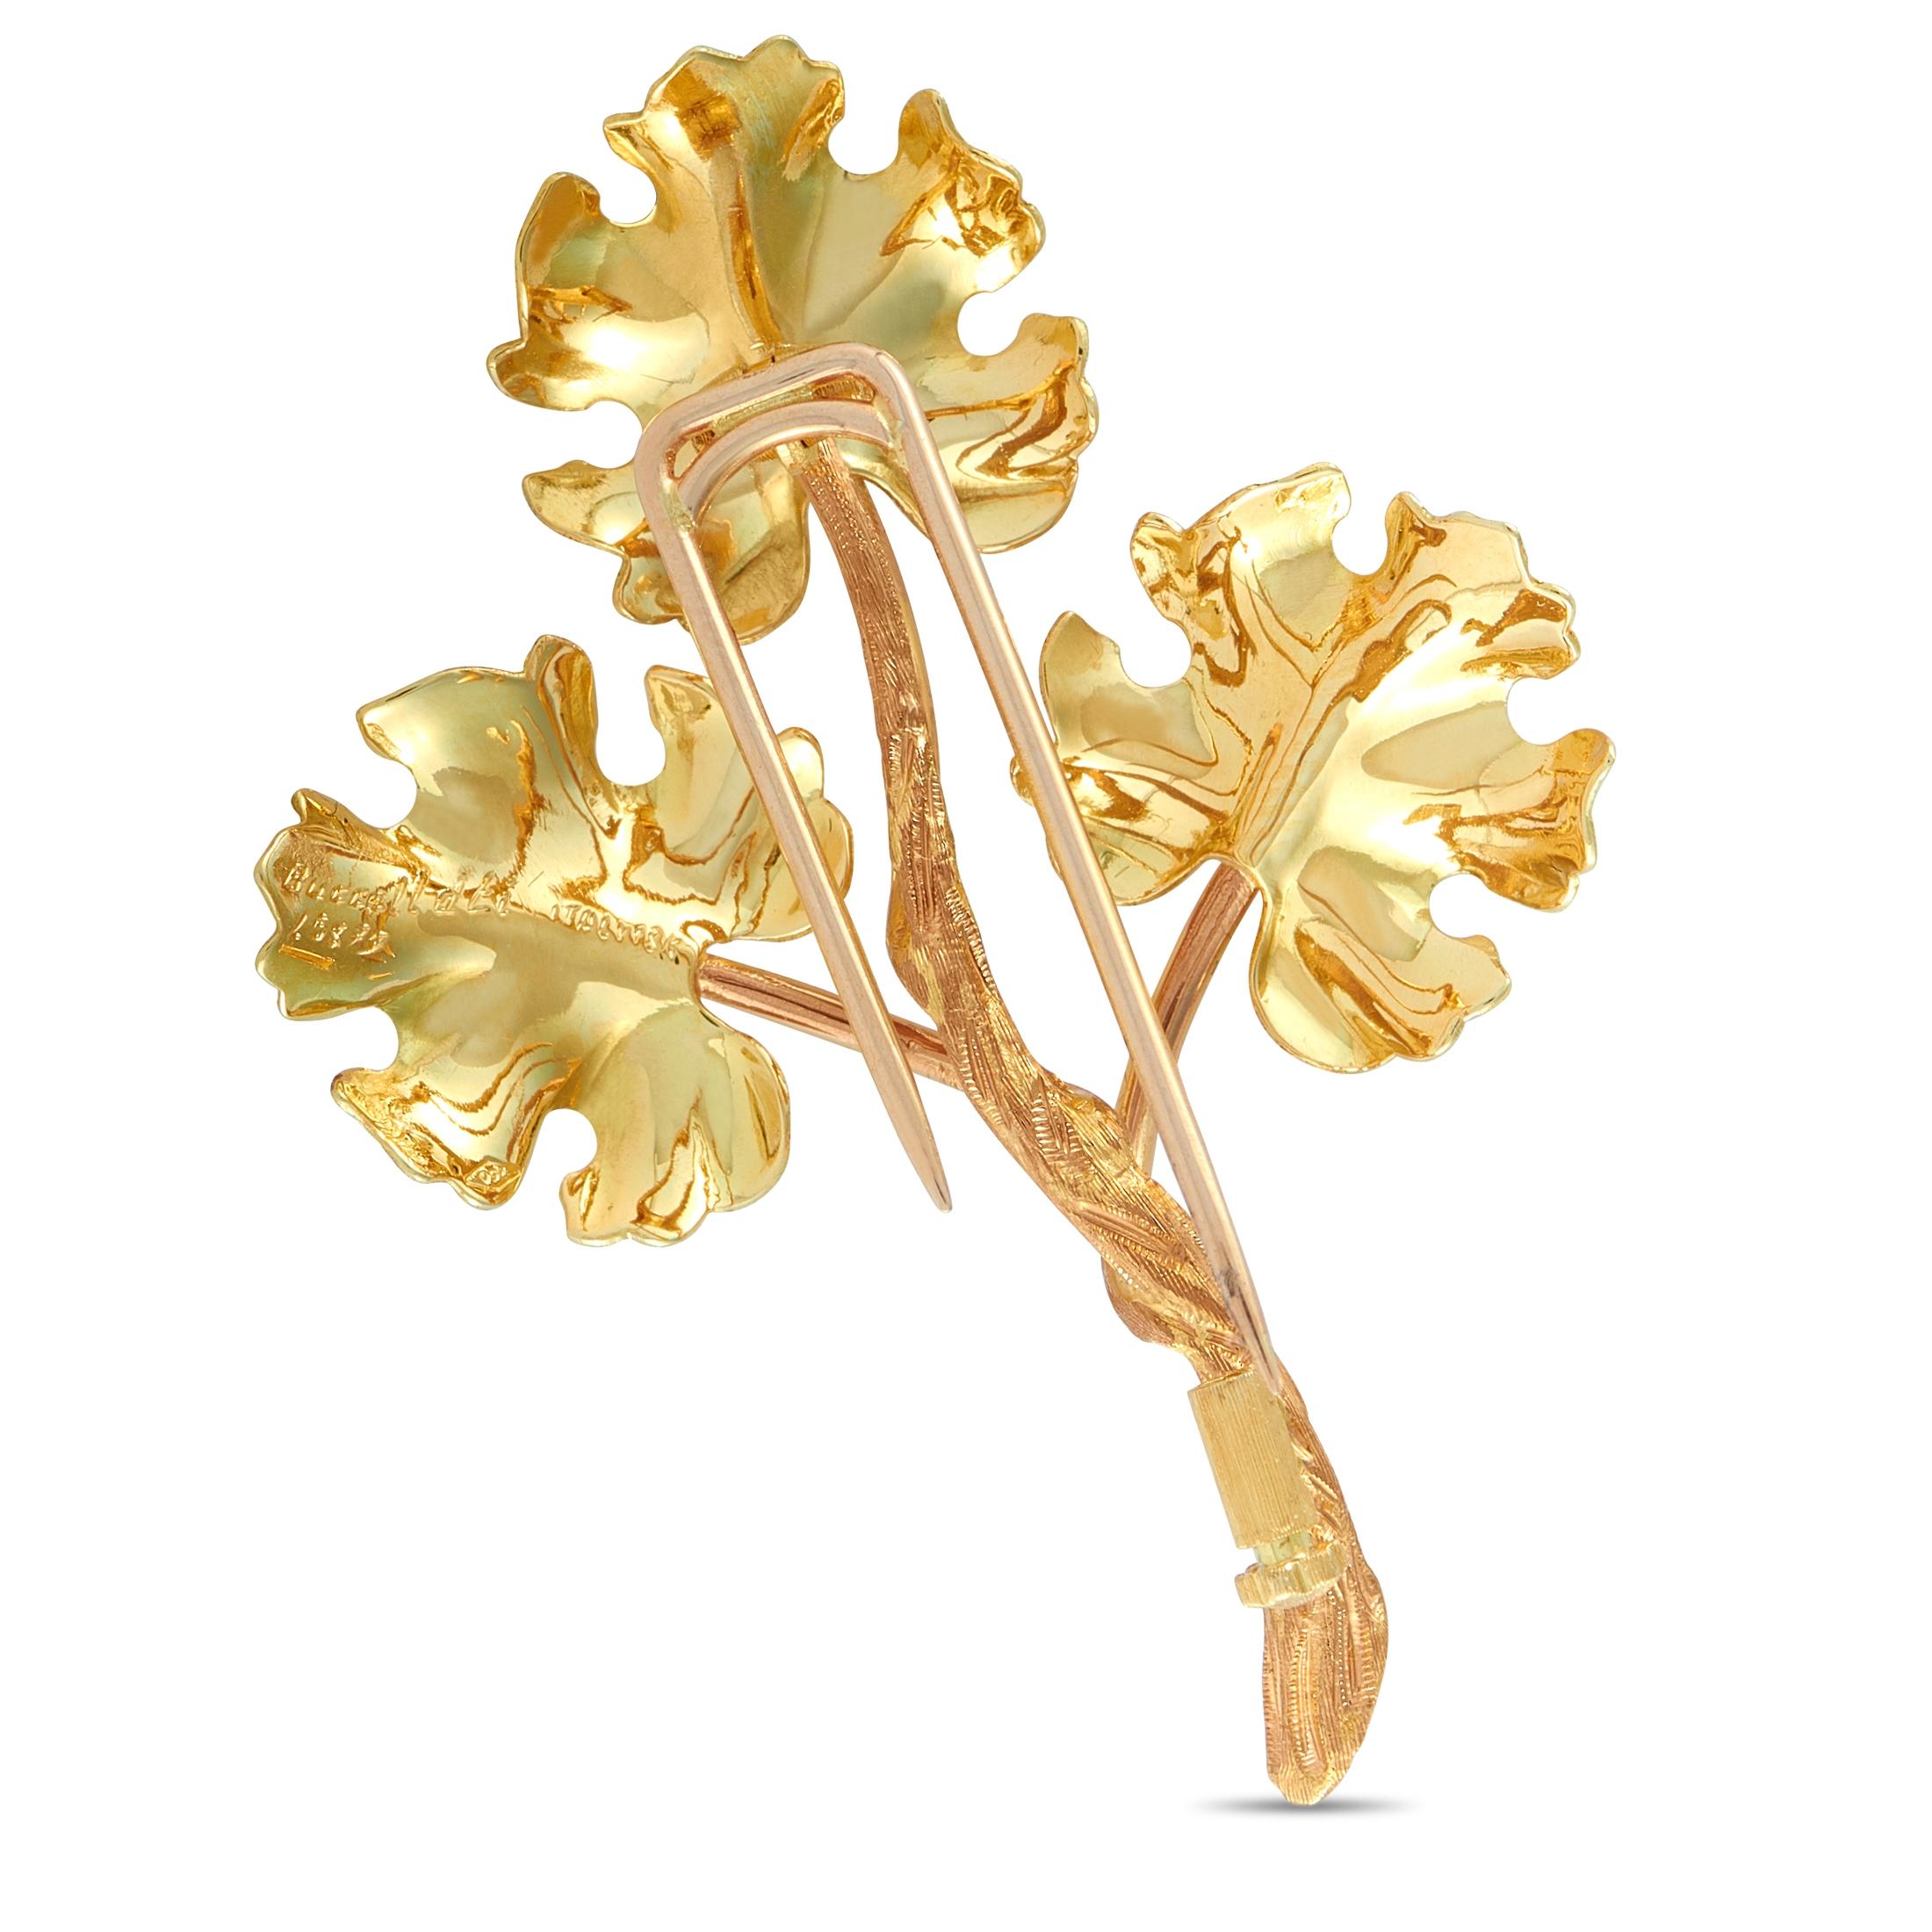 This Buccellati brooch is crafted from 18K yellow gold and weighs 7.5 grams. It measures 1.87” in length and 1.45” in width.
 
 The brooch is offered in estate condition and includes the manufacturer’s box.
